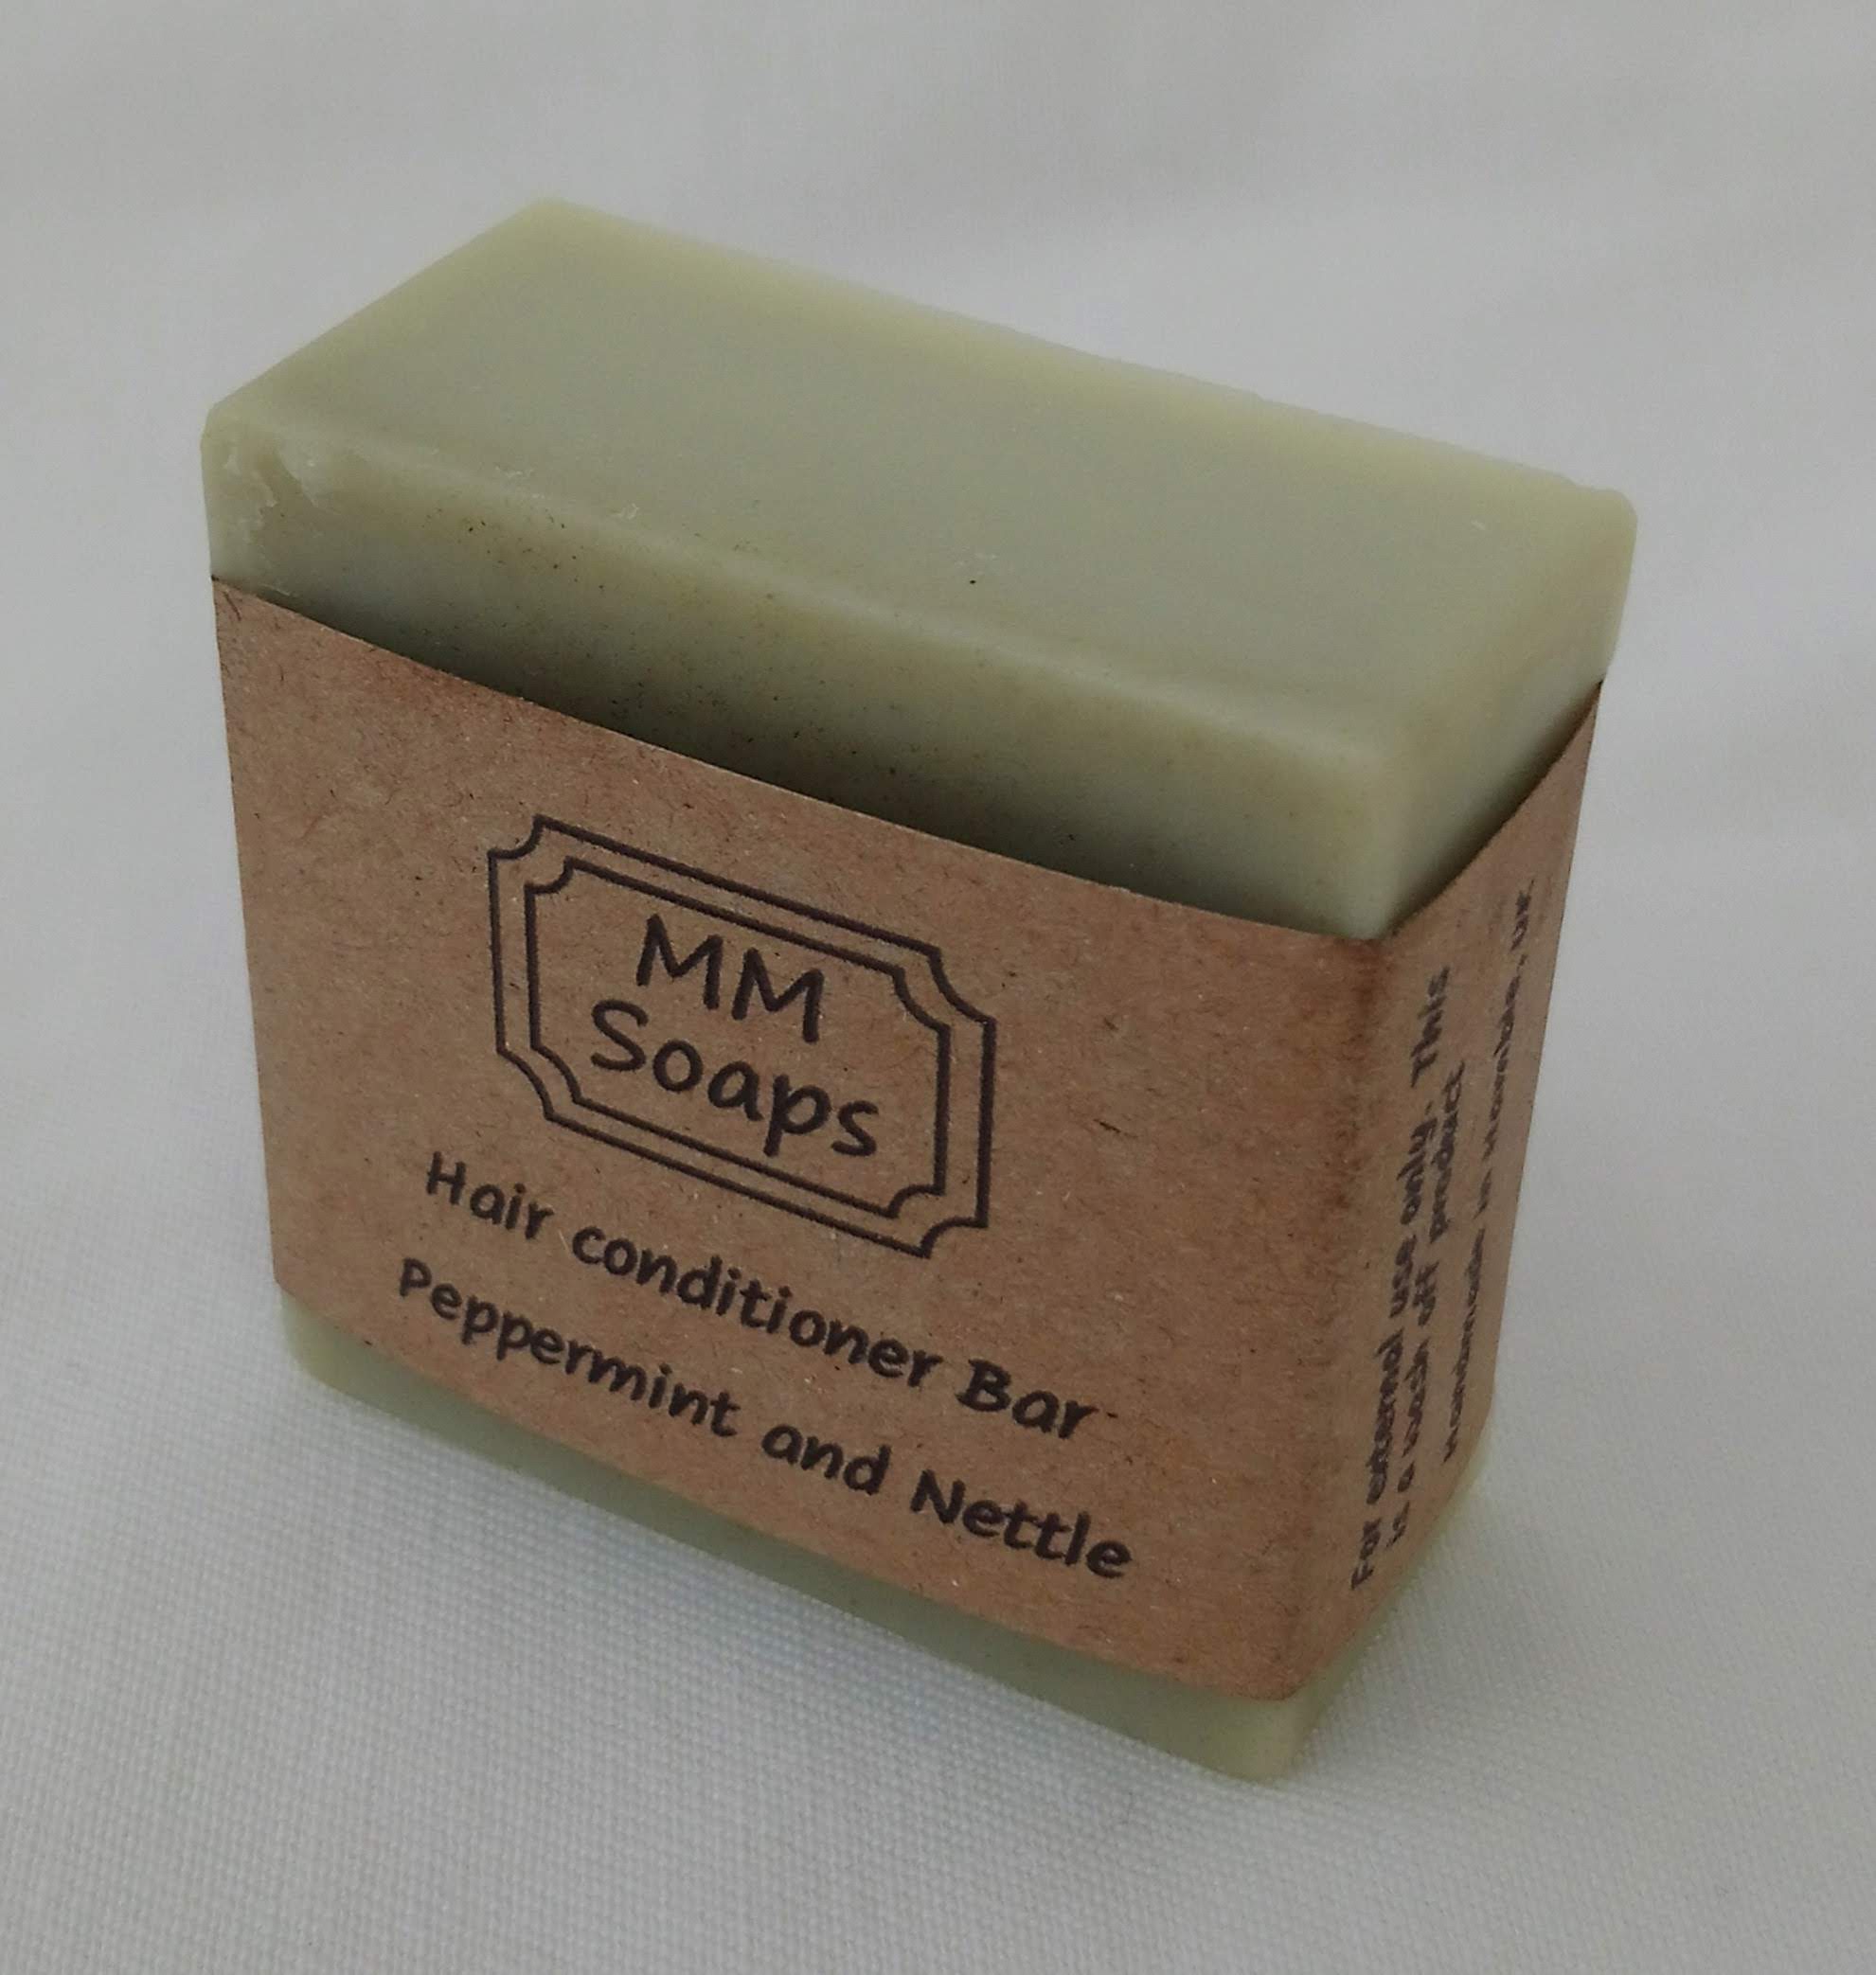 Peppermint and Nettle Conditioner Bar